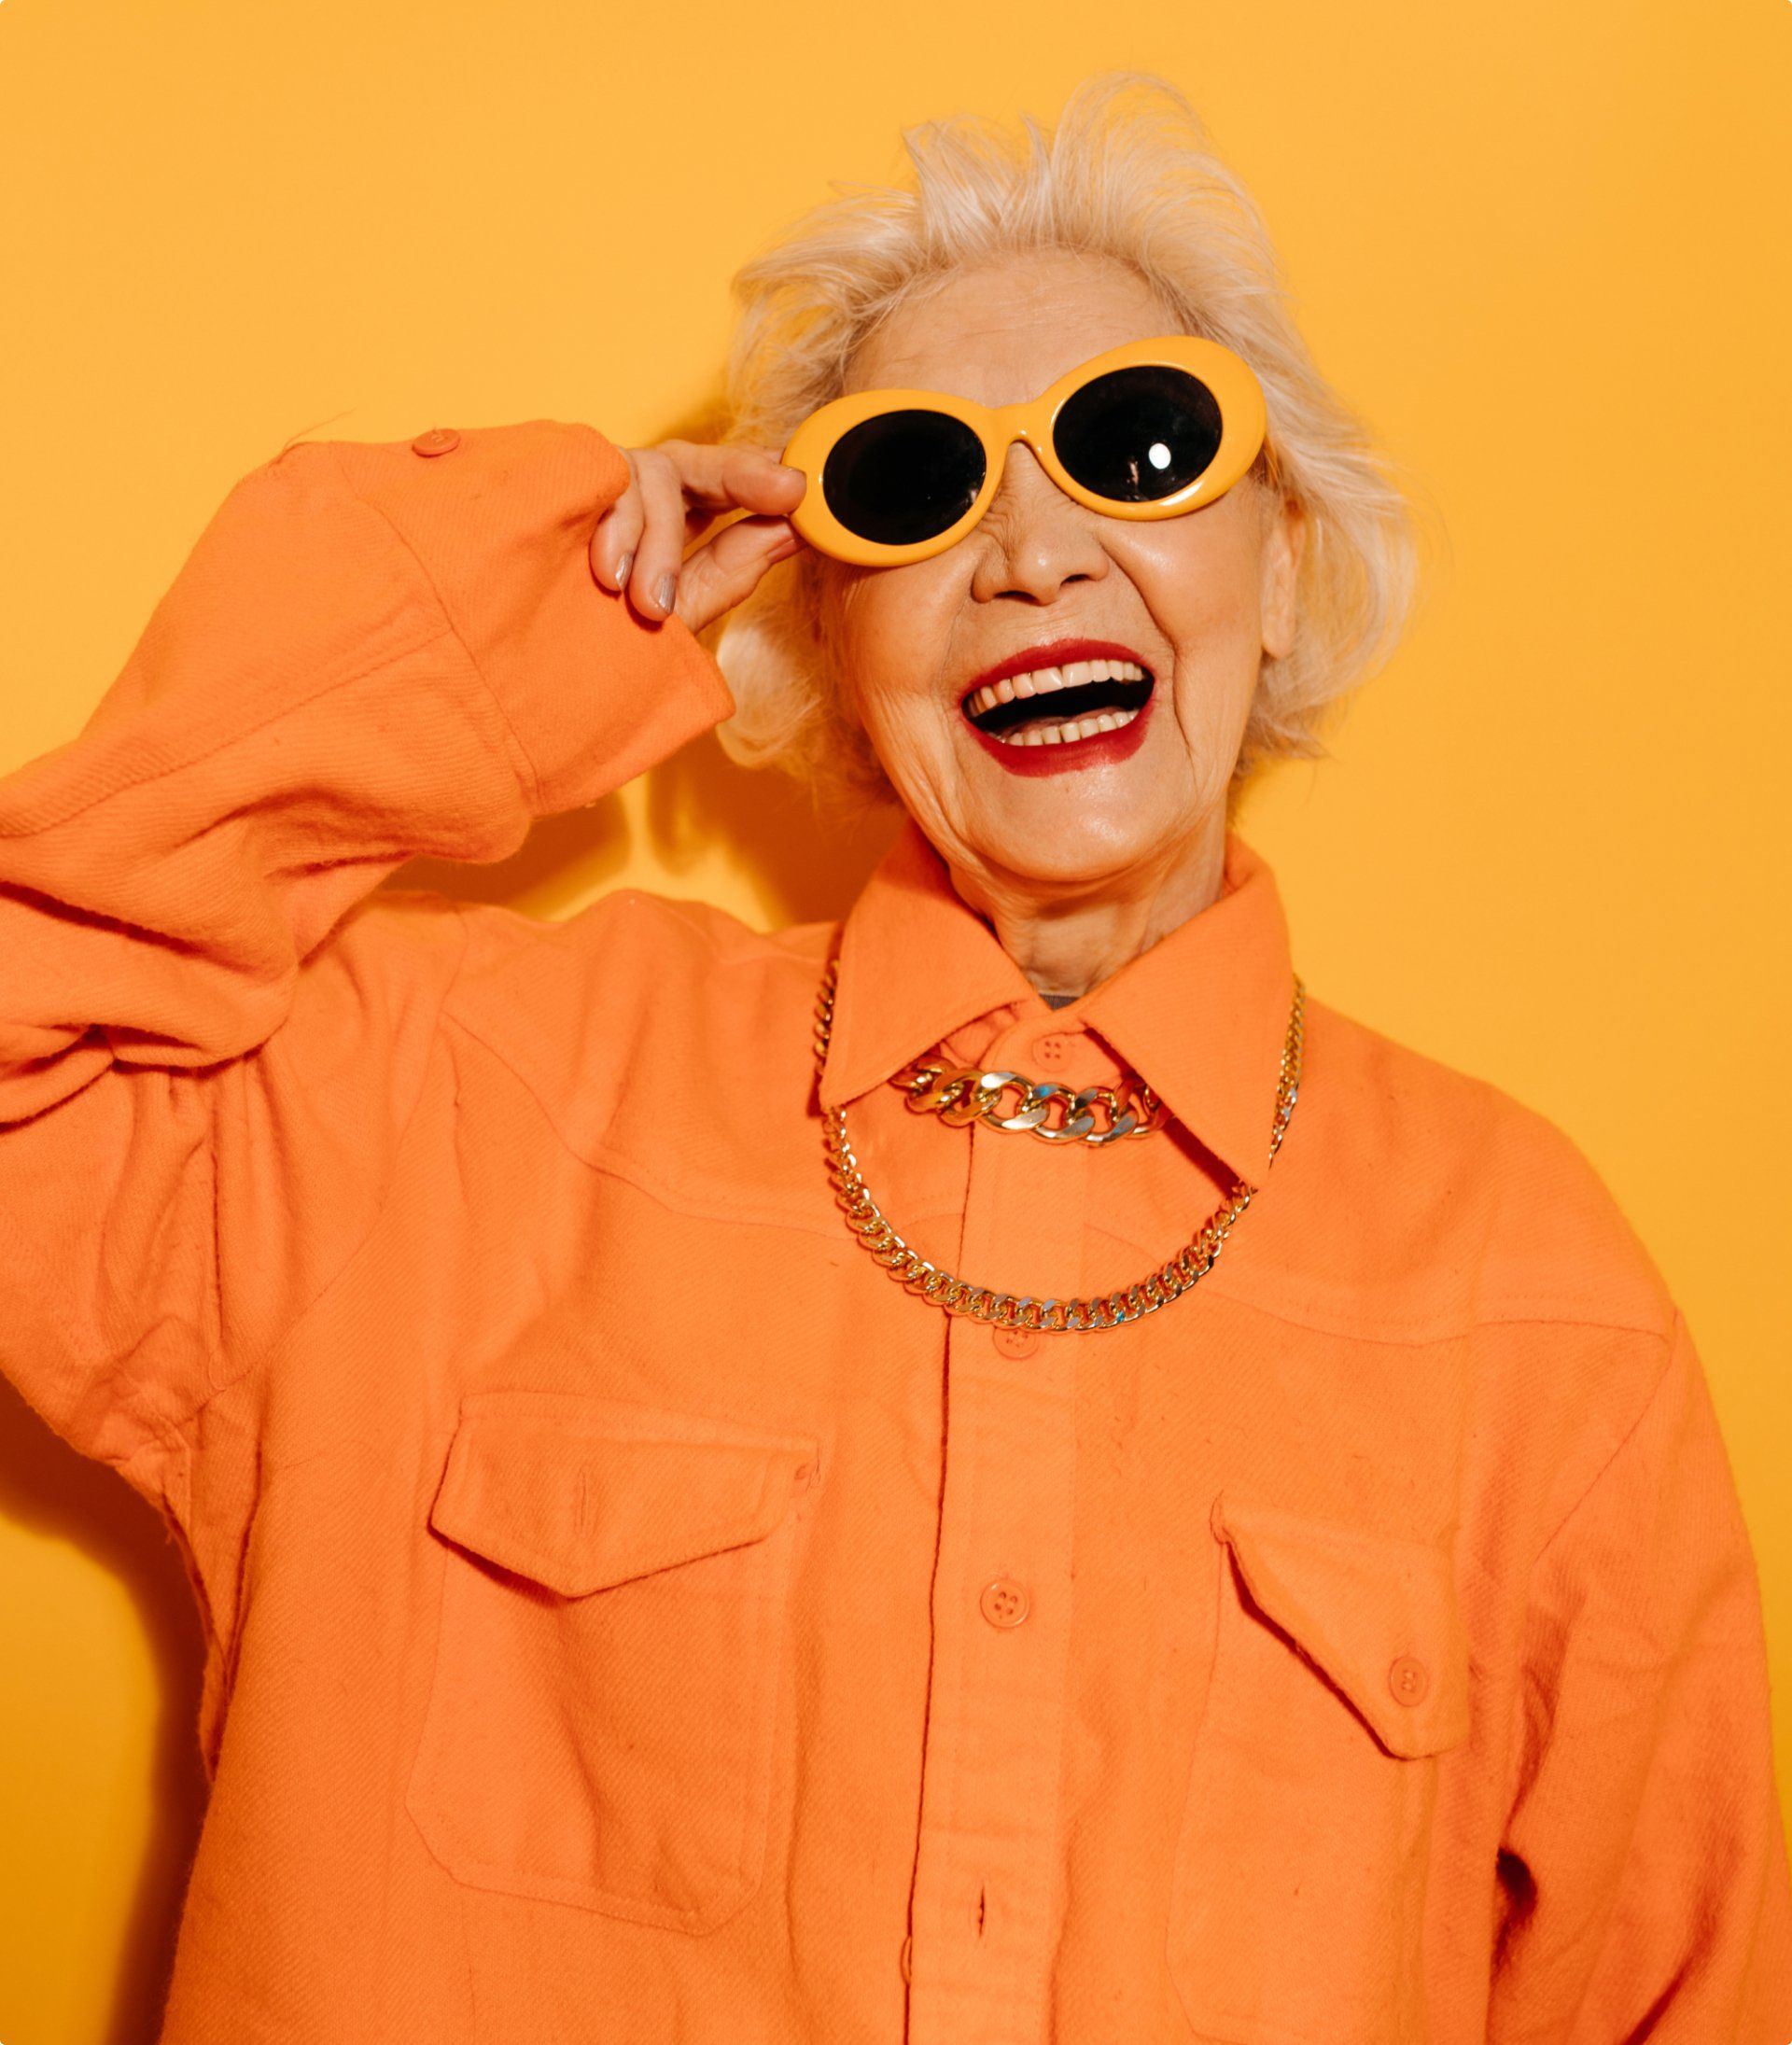 An elderly woman wearing an orange shirt and yellow sunglasses is laughing.